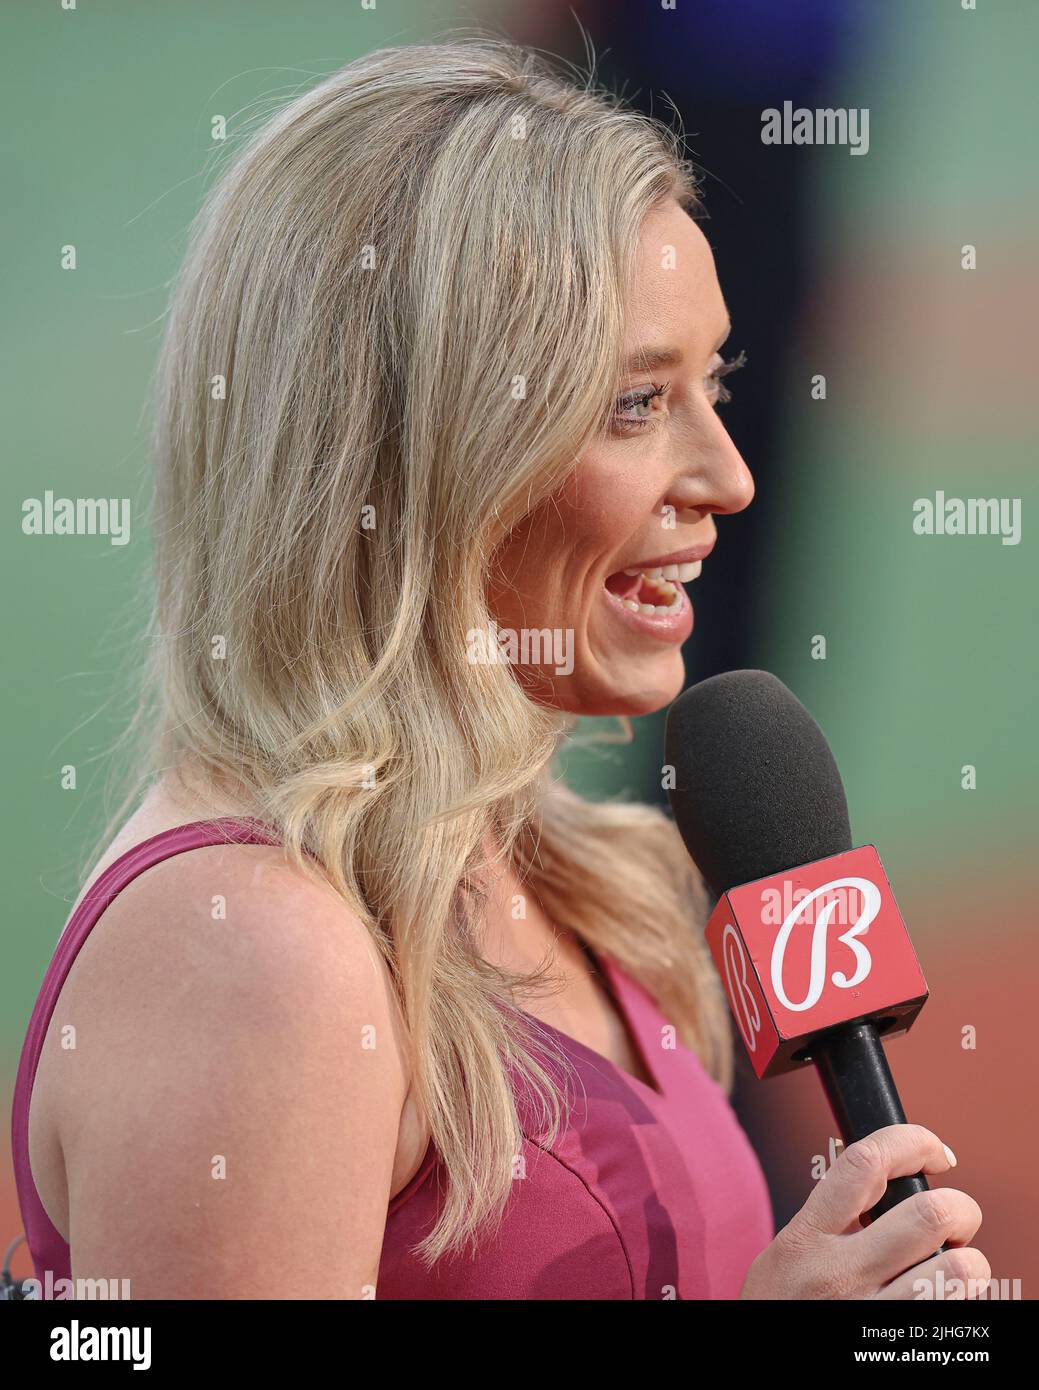 St. Petersburg, FL. USA;  Bally’s Sports reporter Tricia Whitaker during segment prior to a major league baseball game against the Baltimore Orioles, Stock Photo